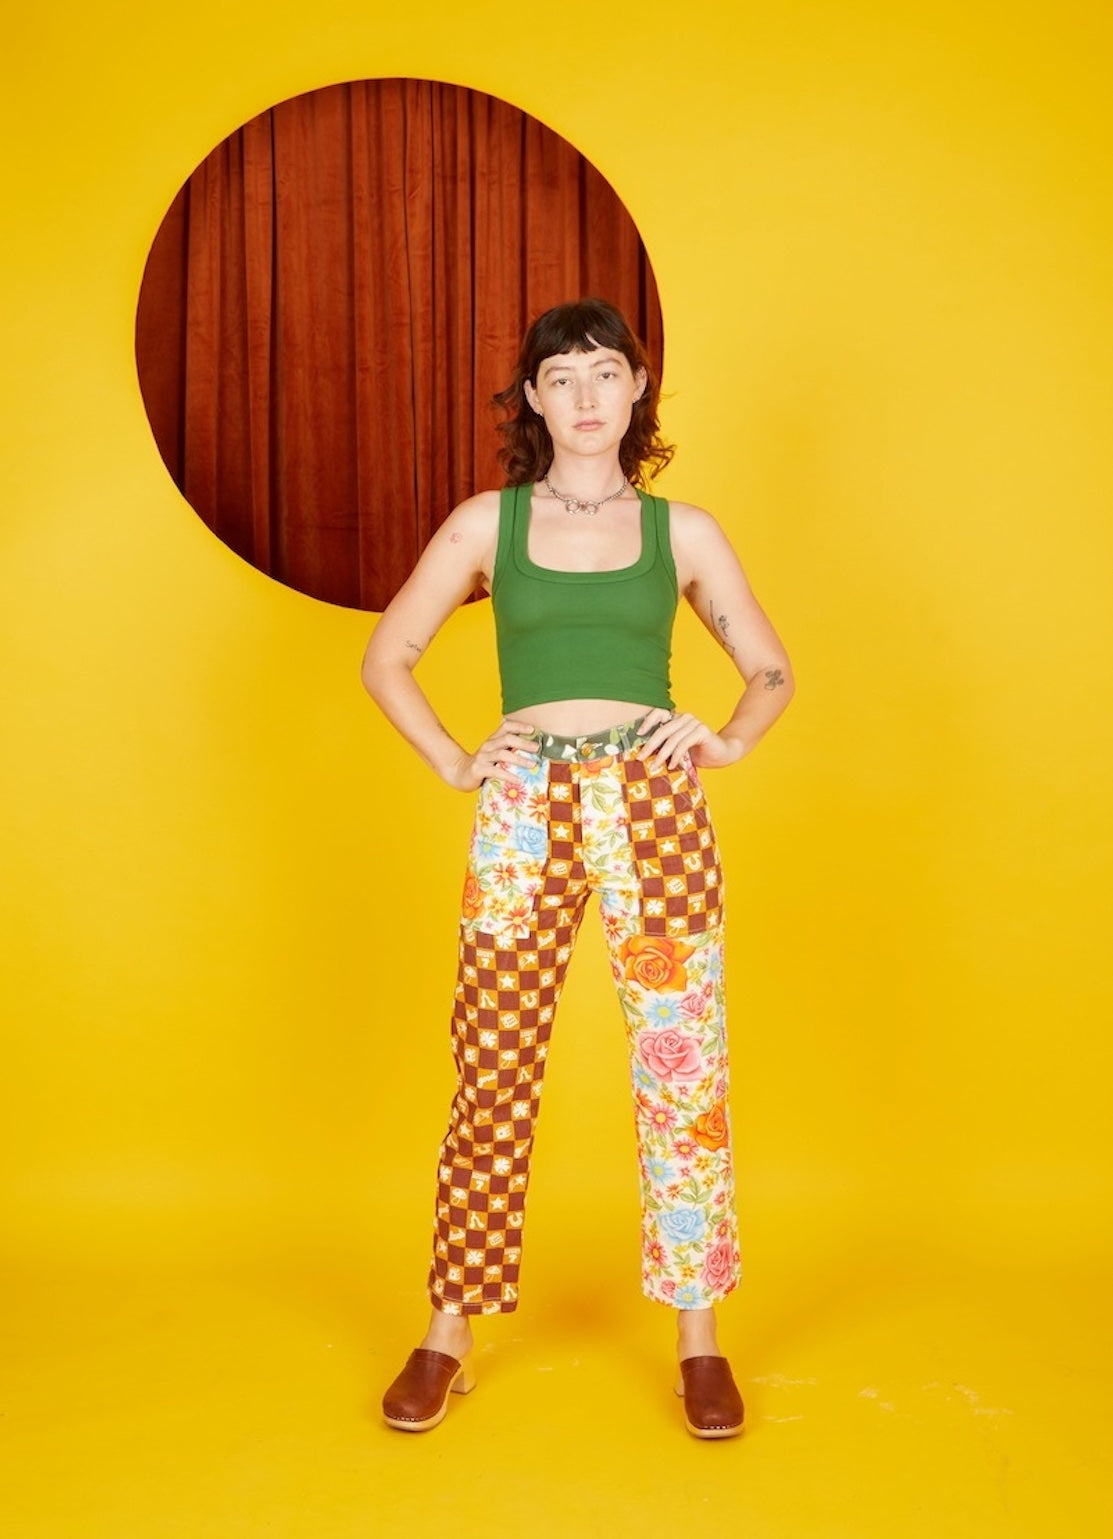 Alexandra Skye is wearing Cropped Tank Top in Lawn Green and Mismatched Print Work Pants